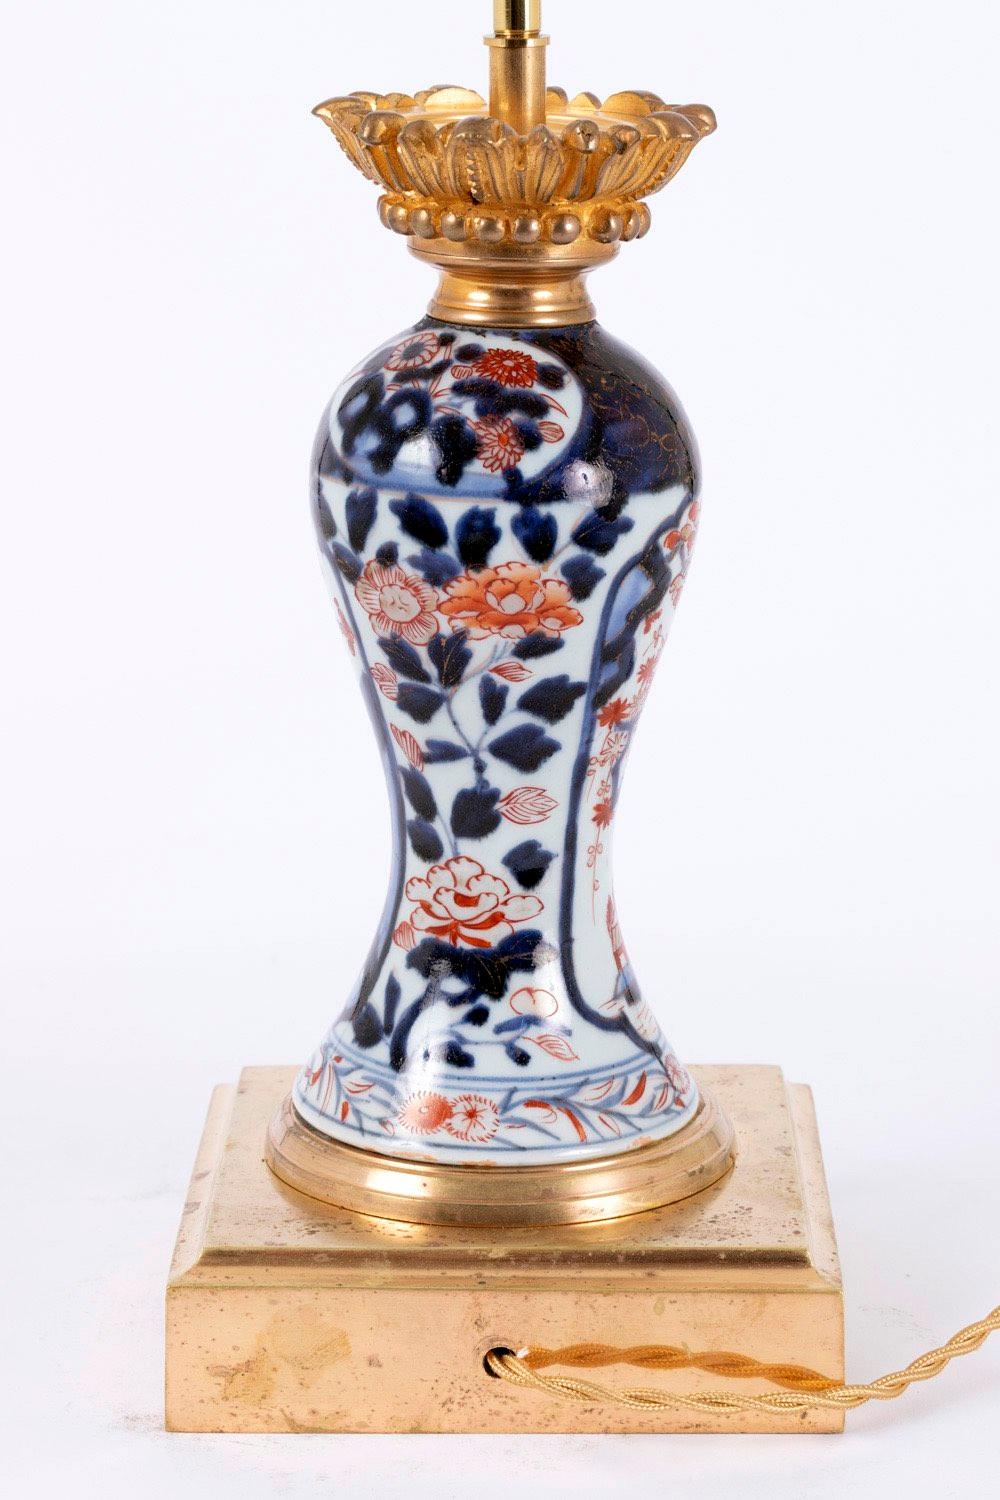 Pair of baluster shaped lamps in Imari porcelain. Chiselled and gilt bronze mount, standing on a moulded square shape base.
Lamp body bottom part decorated with a frieze of blue edgings framing chrysanthemum and red foliage. Floral Imari decor, blue